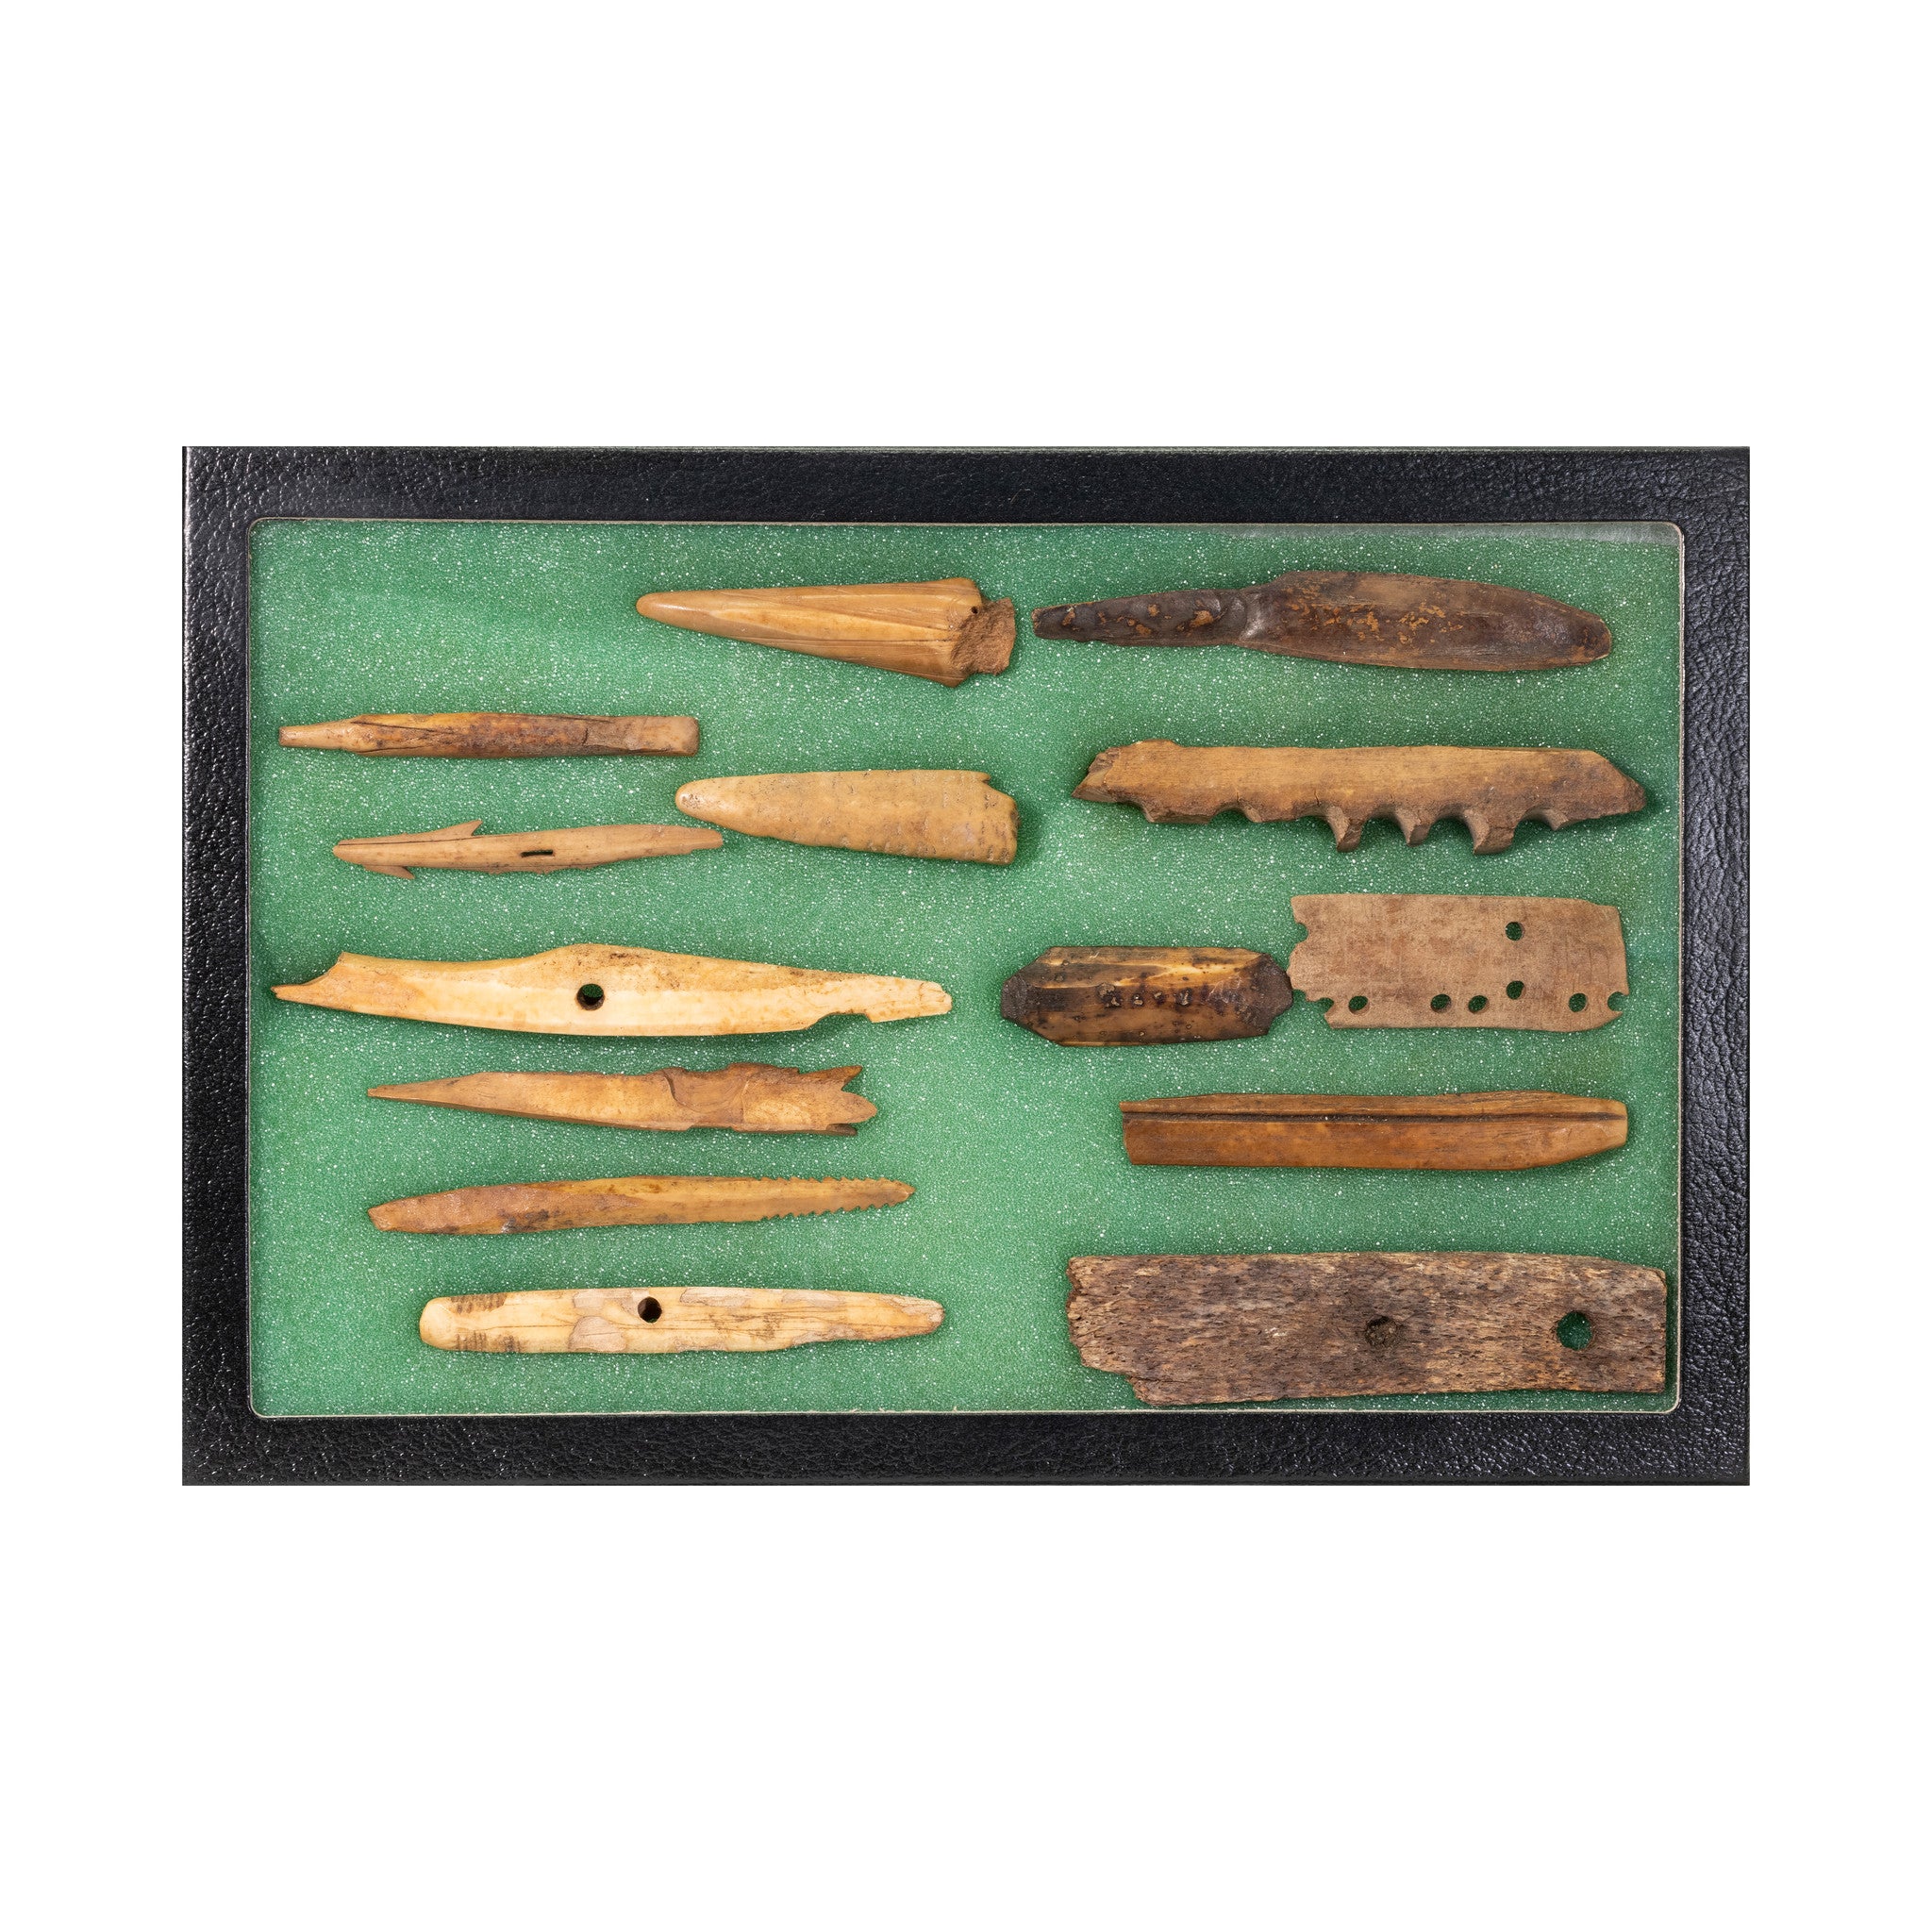 Fossilized Ivory Tools, Native, Stone and Tools, Bone